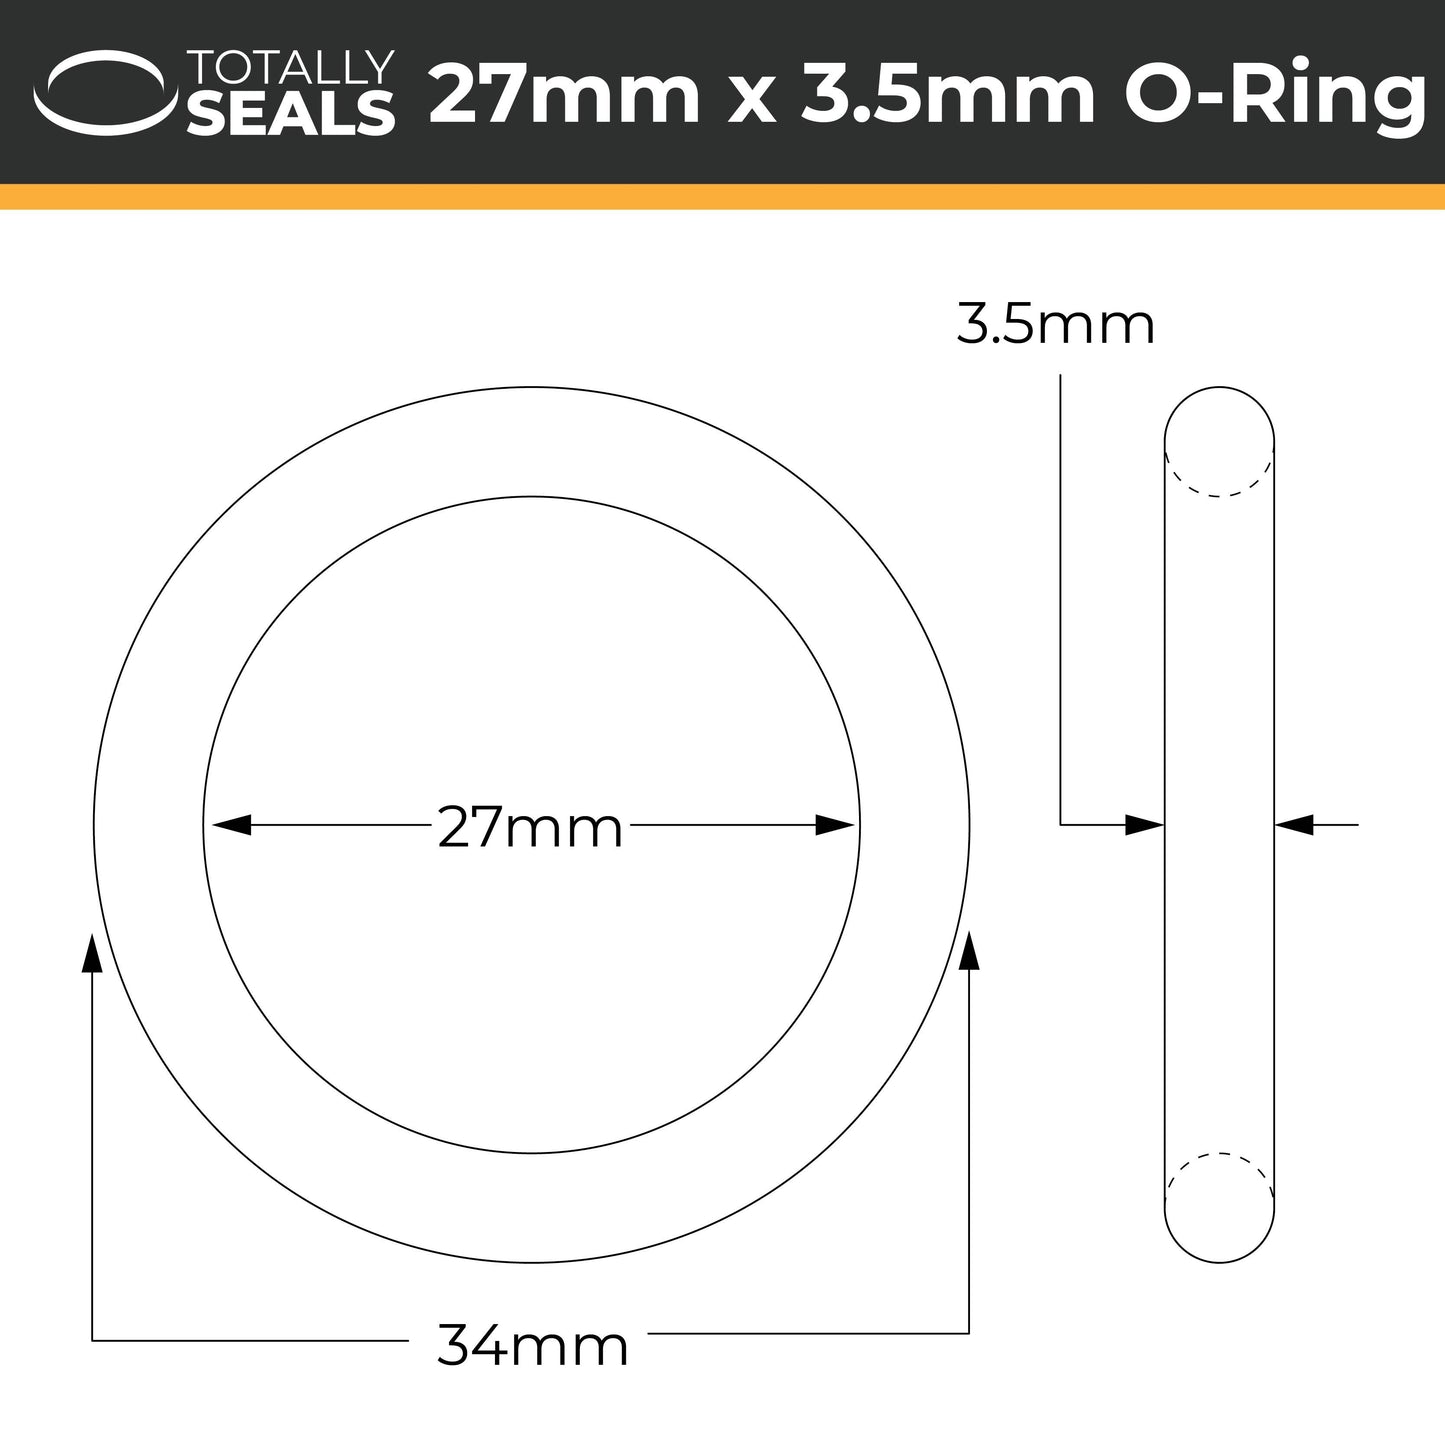 27mm x 3.5mm (34mm OD) Nitrile O-Rings - Totally Seals®